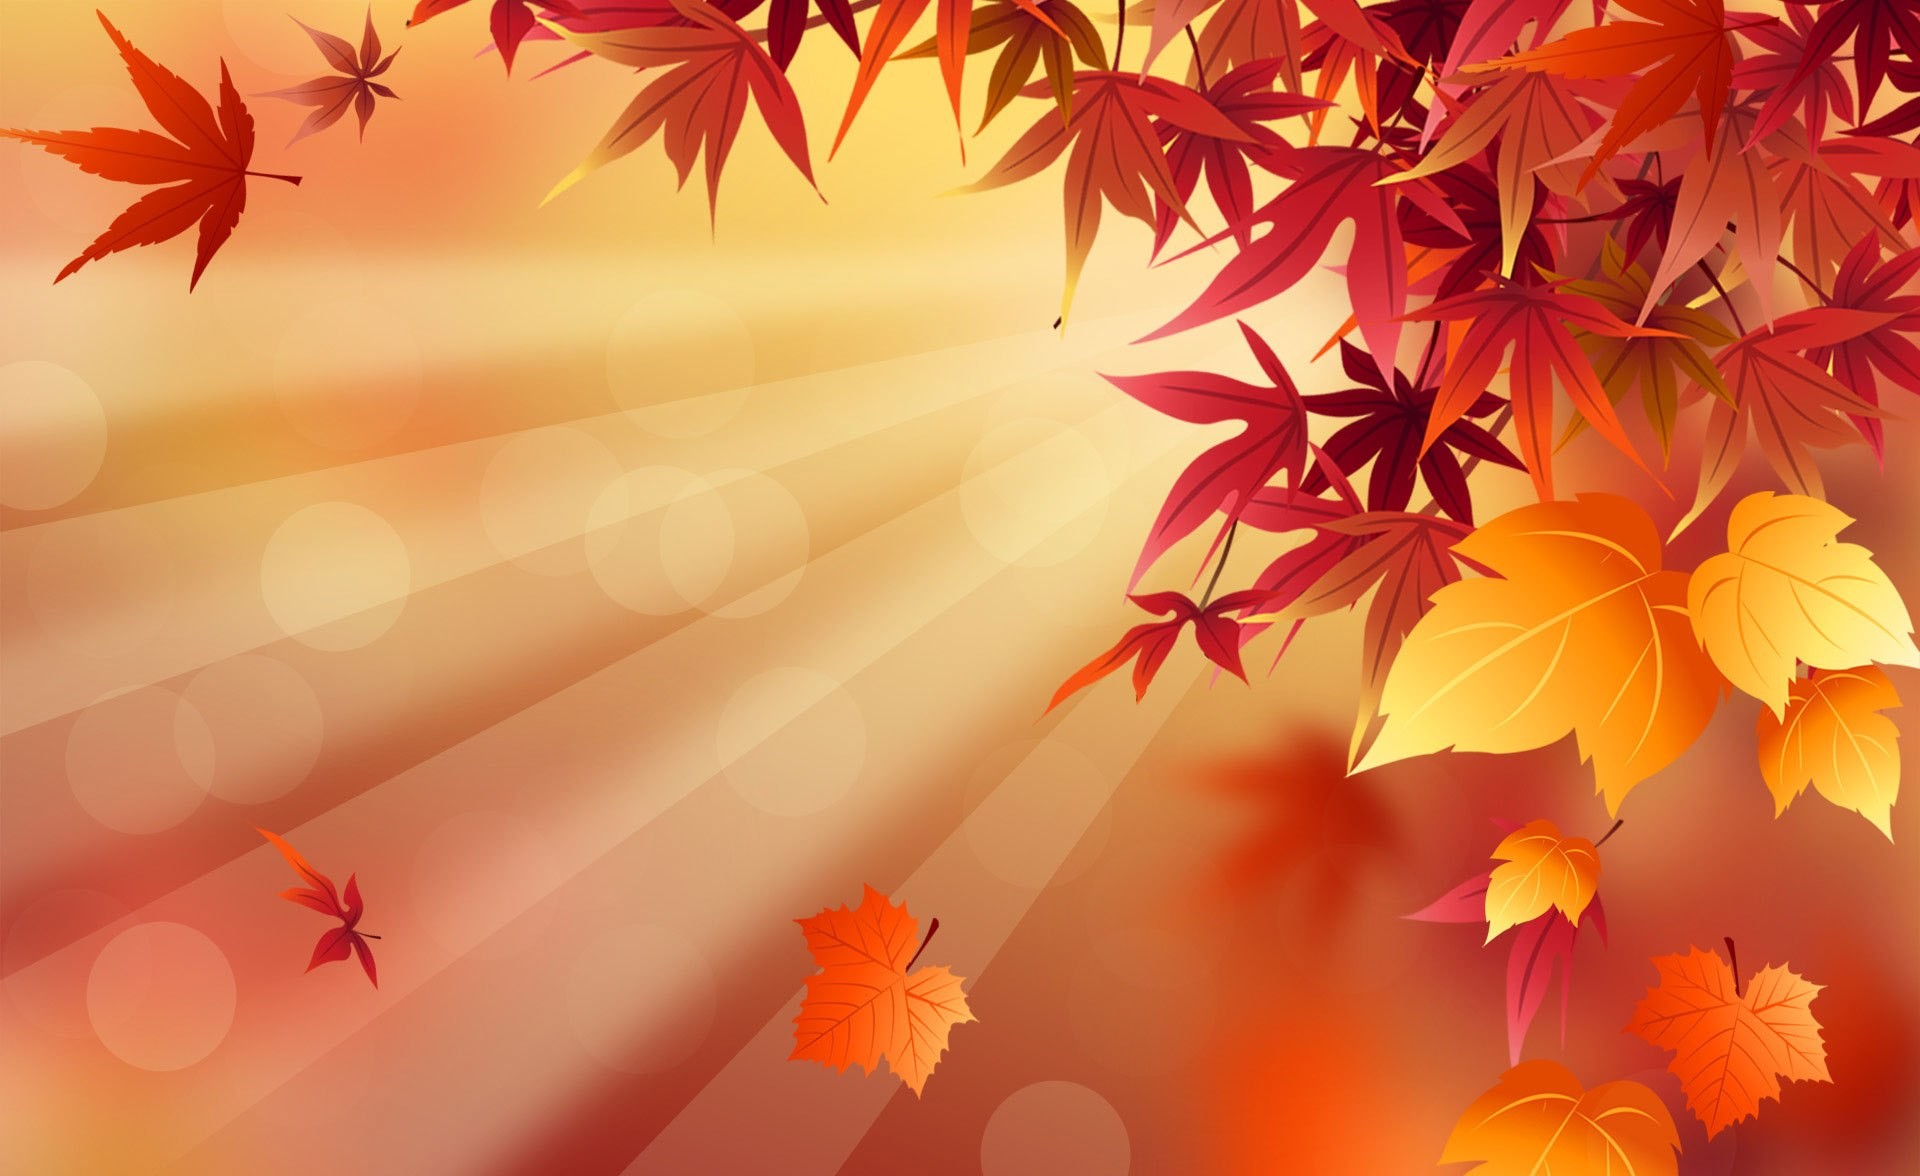 1920x1176 46 Free Fall Wallpapers and Backgrounds: Fall Wallpaper by Jpquidores